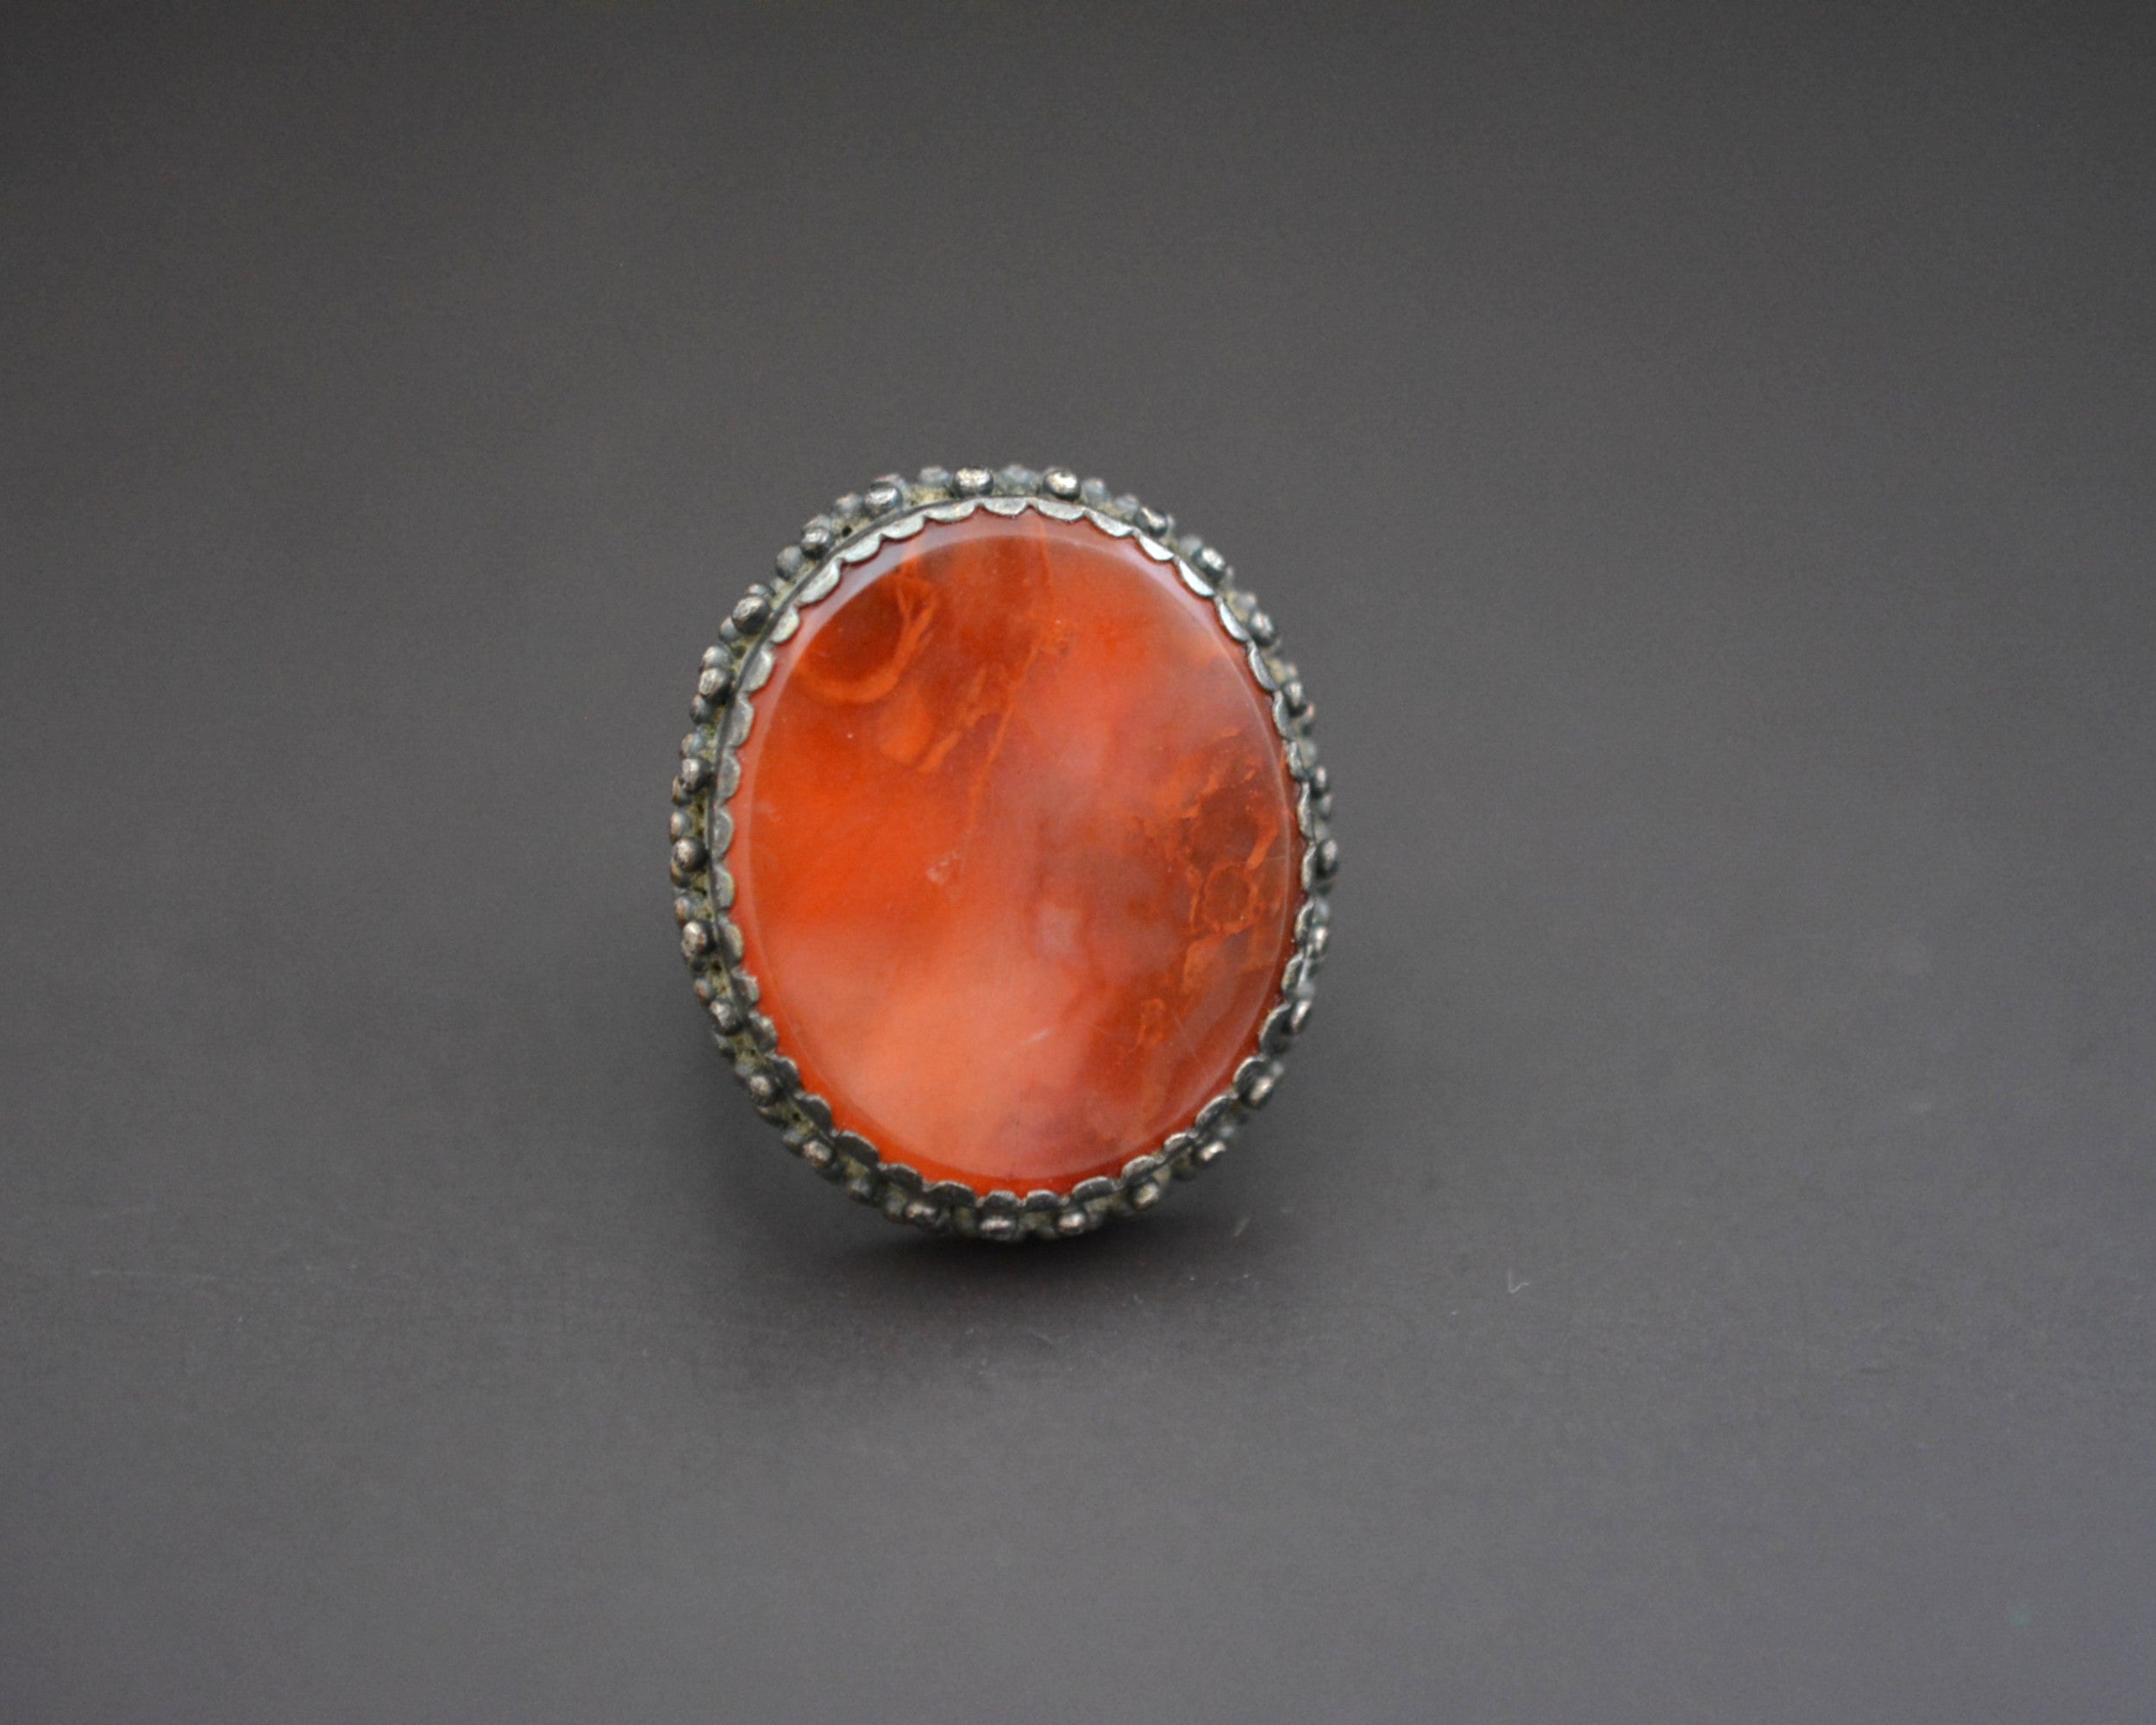 Reserved for I. - Large Ethnic Carnelian Ring - Size 8